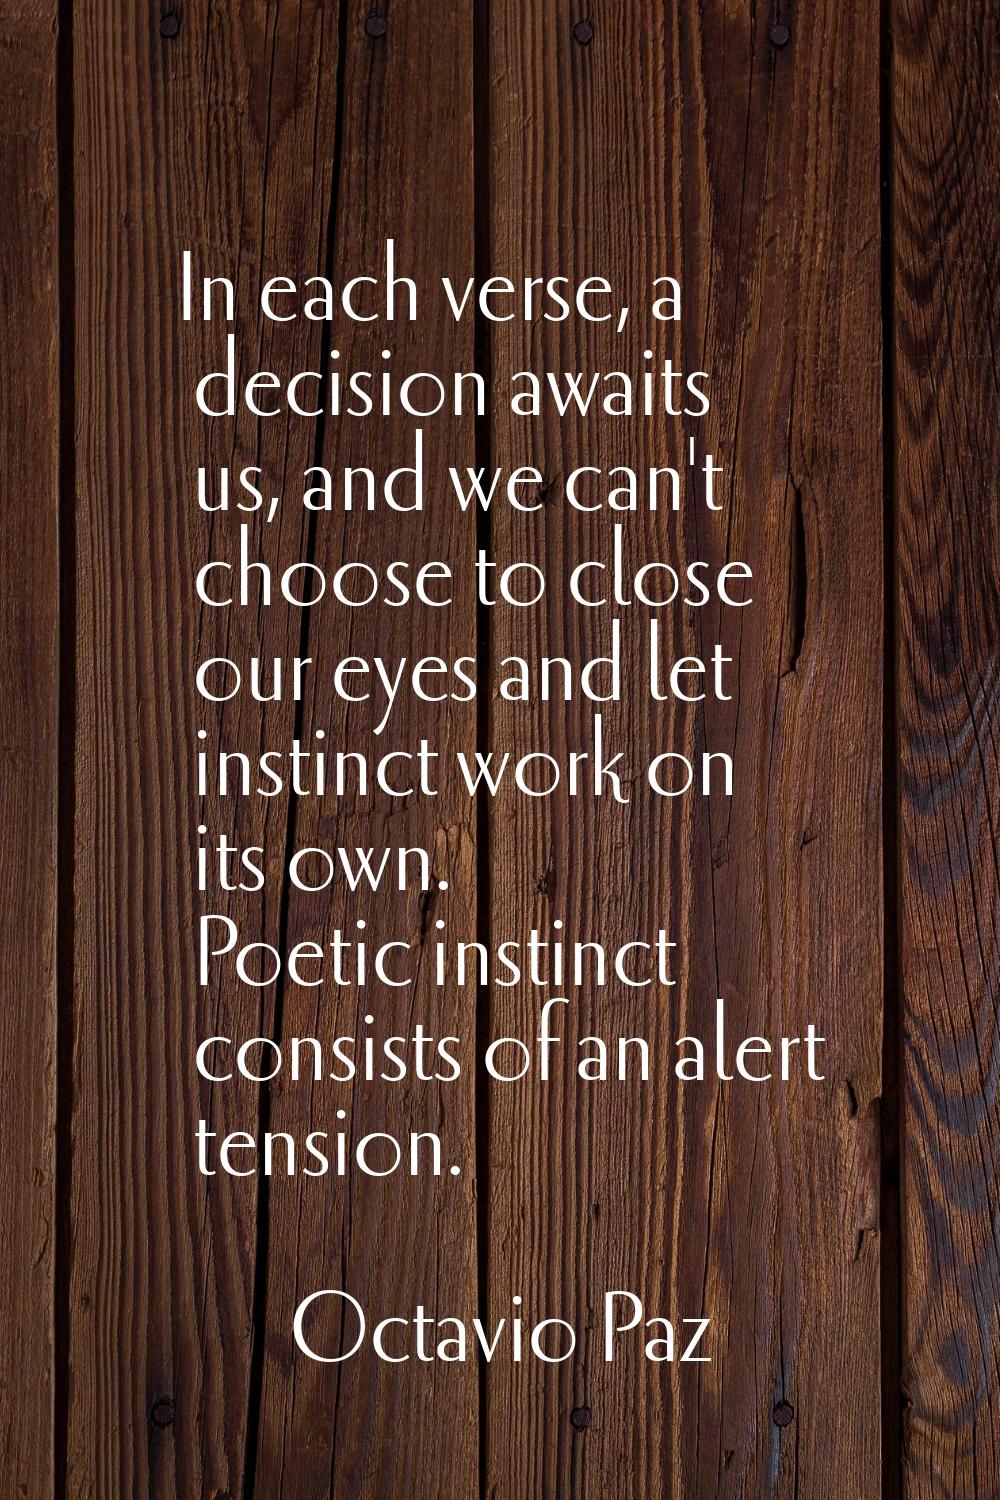 In each verse, a decision awaits us, and we can't choose to close our eyes and let instinct work on